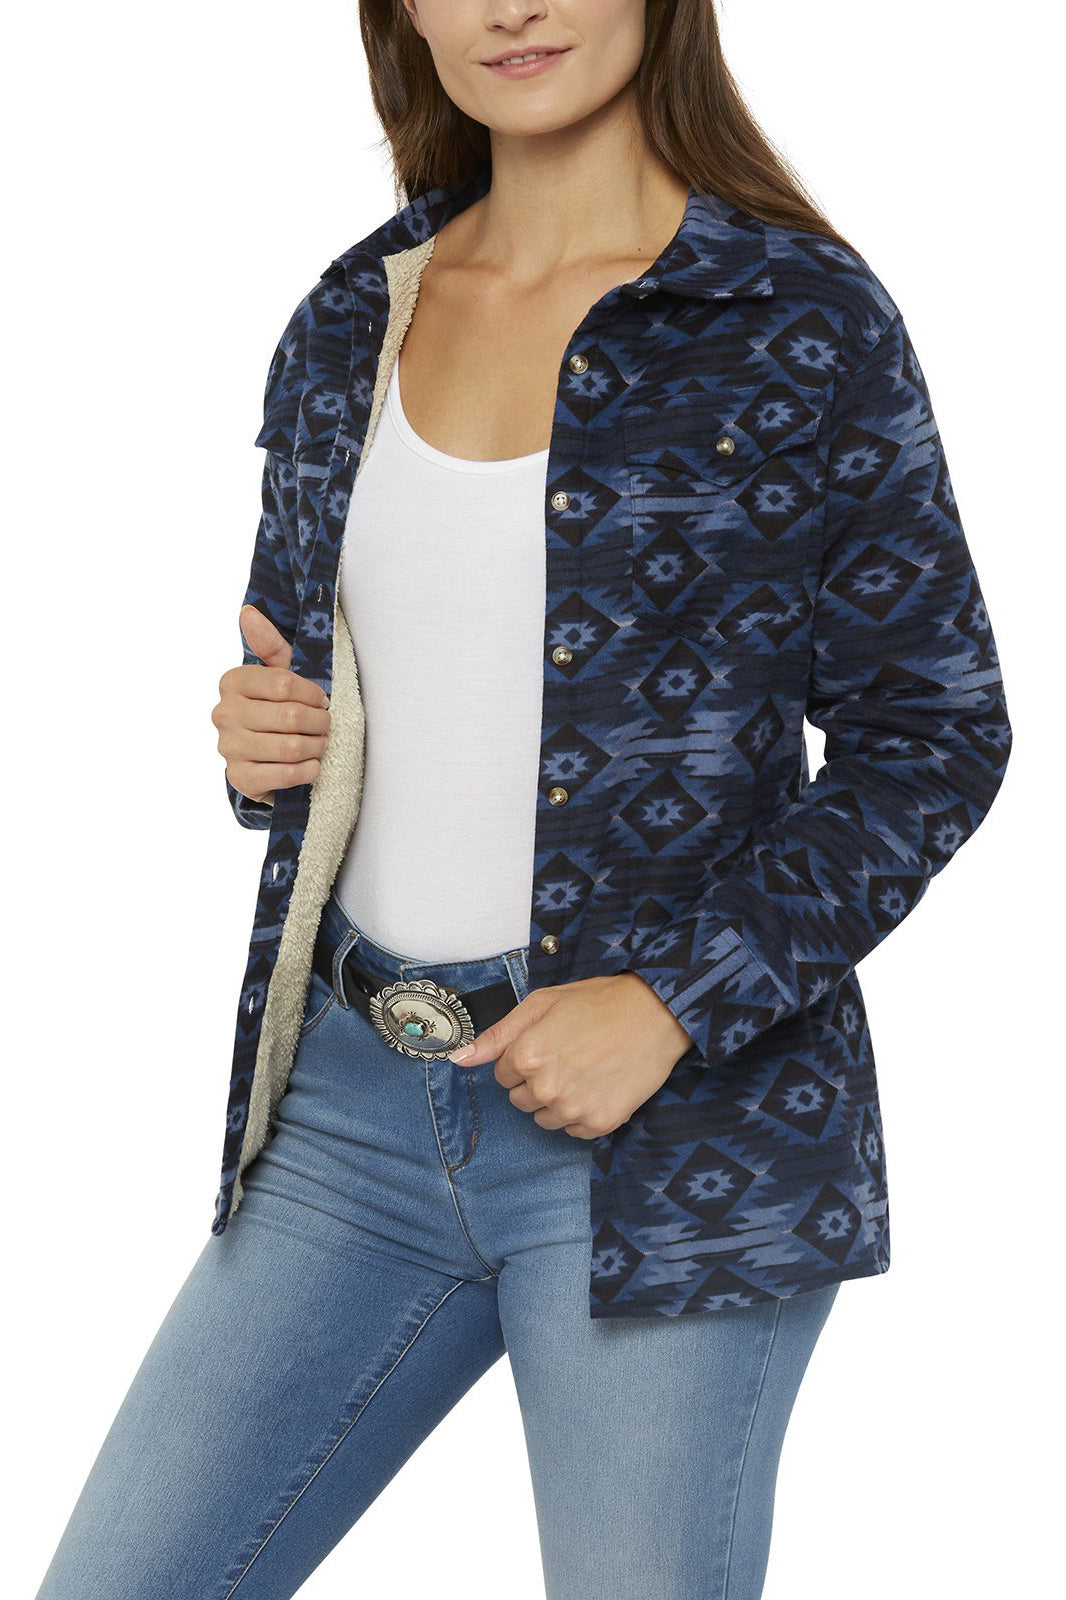 Women's Sherpa Lined Aztec Flannel Shirt by Ely Cattleman